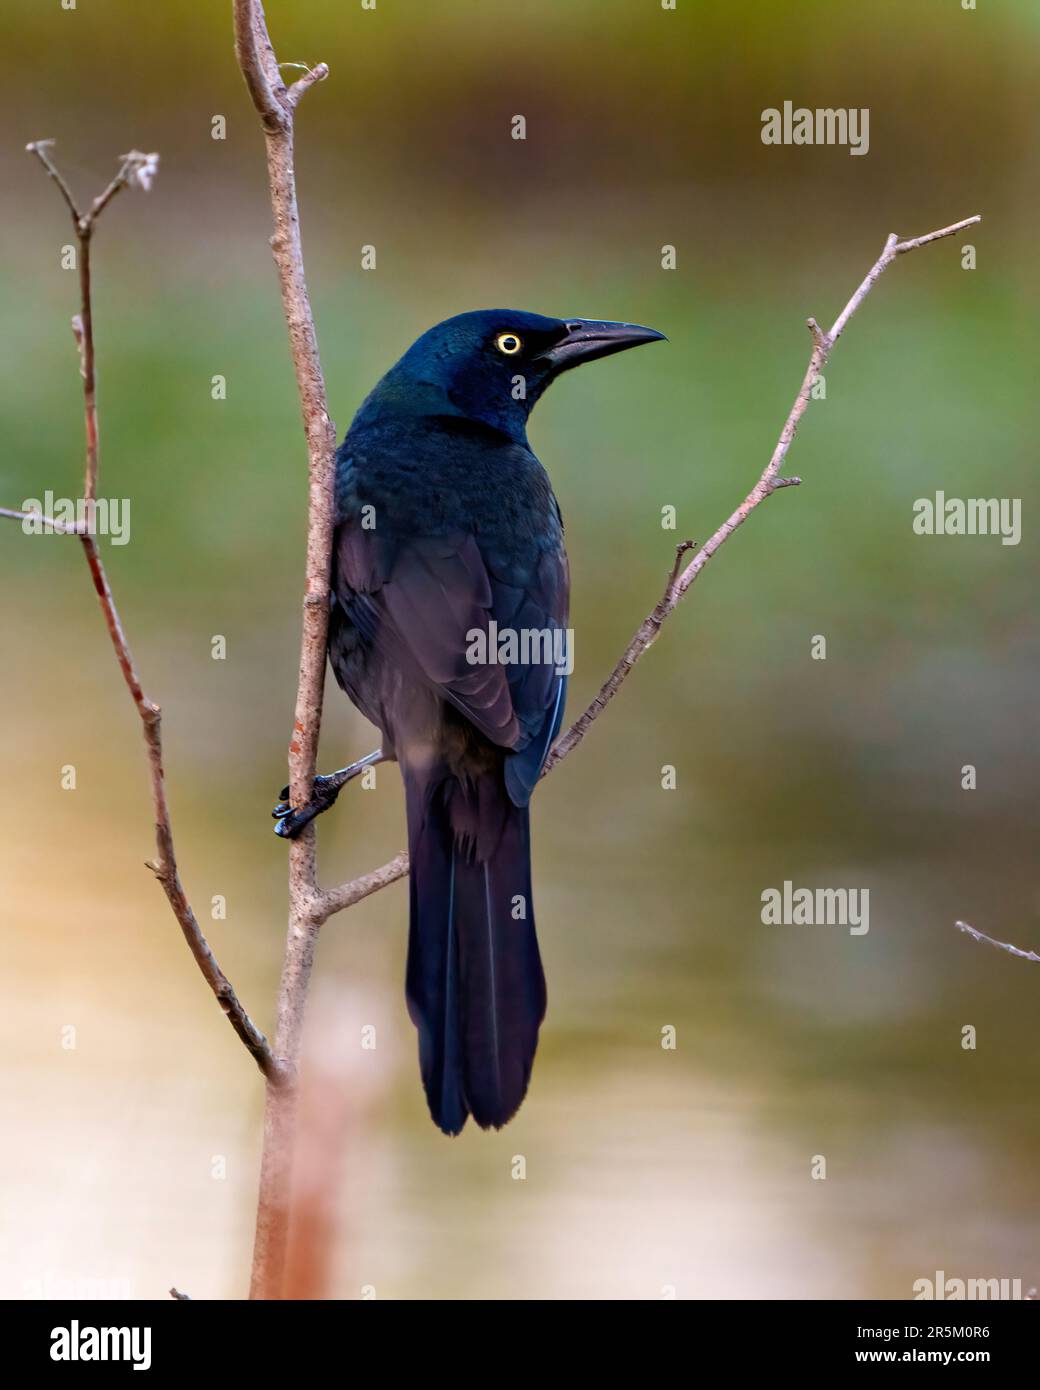 Common Grackle close up rear view perched on a branch in its environment and habitat surrounding with a coloured background. Grackle Picture. Stock Photo